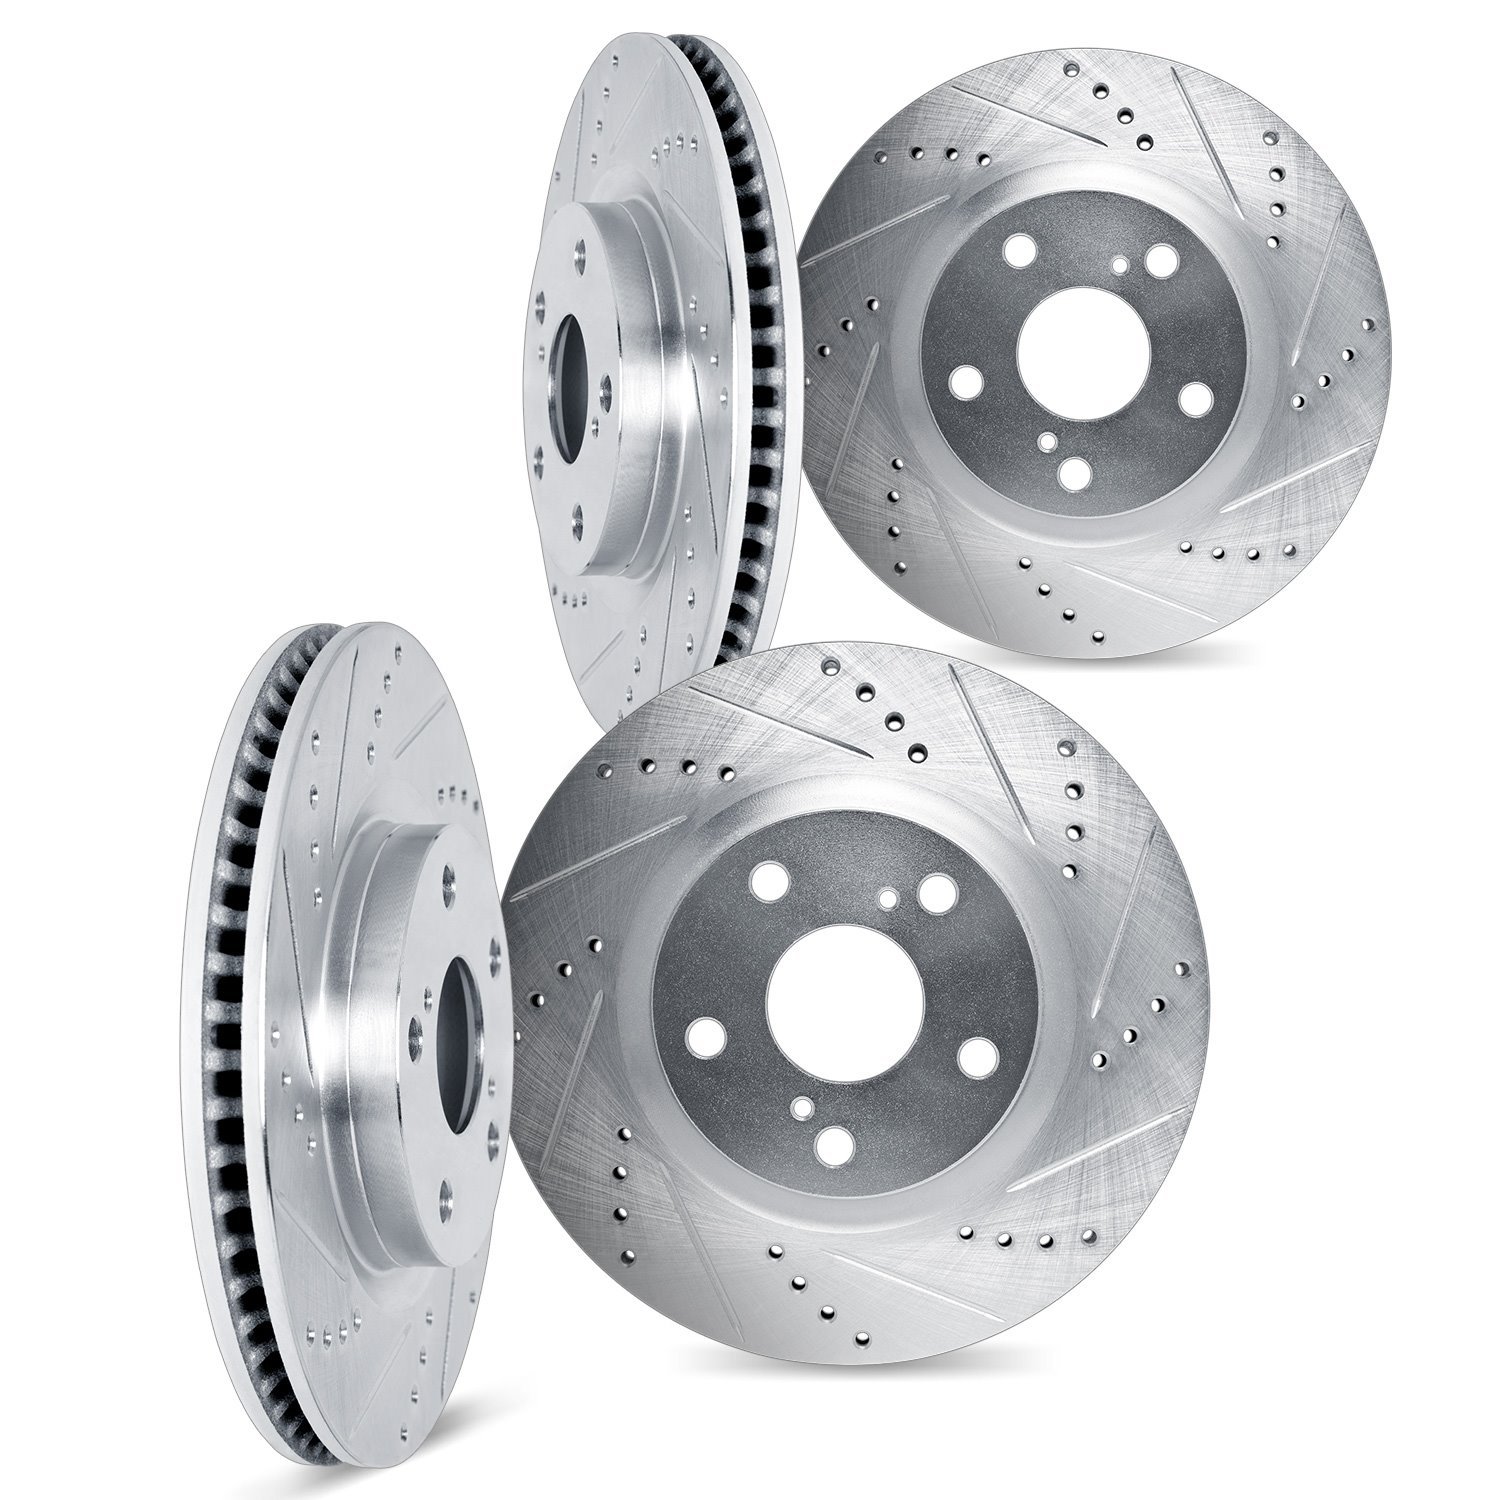 7004-31058 Drilled/Slotted Brake Rotors [Silver], Fits Select BMW, Position: Front and Rear